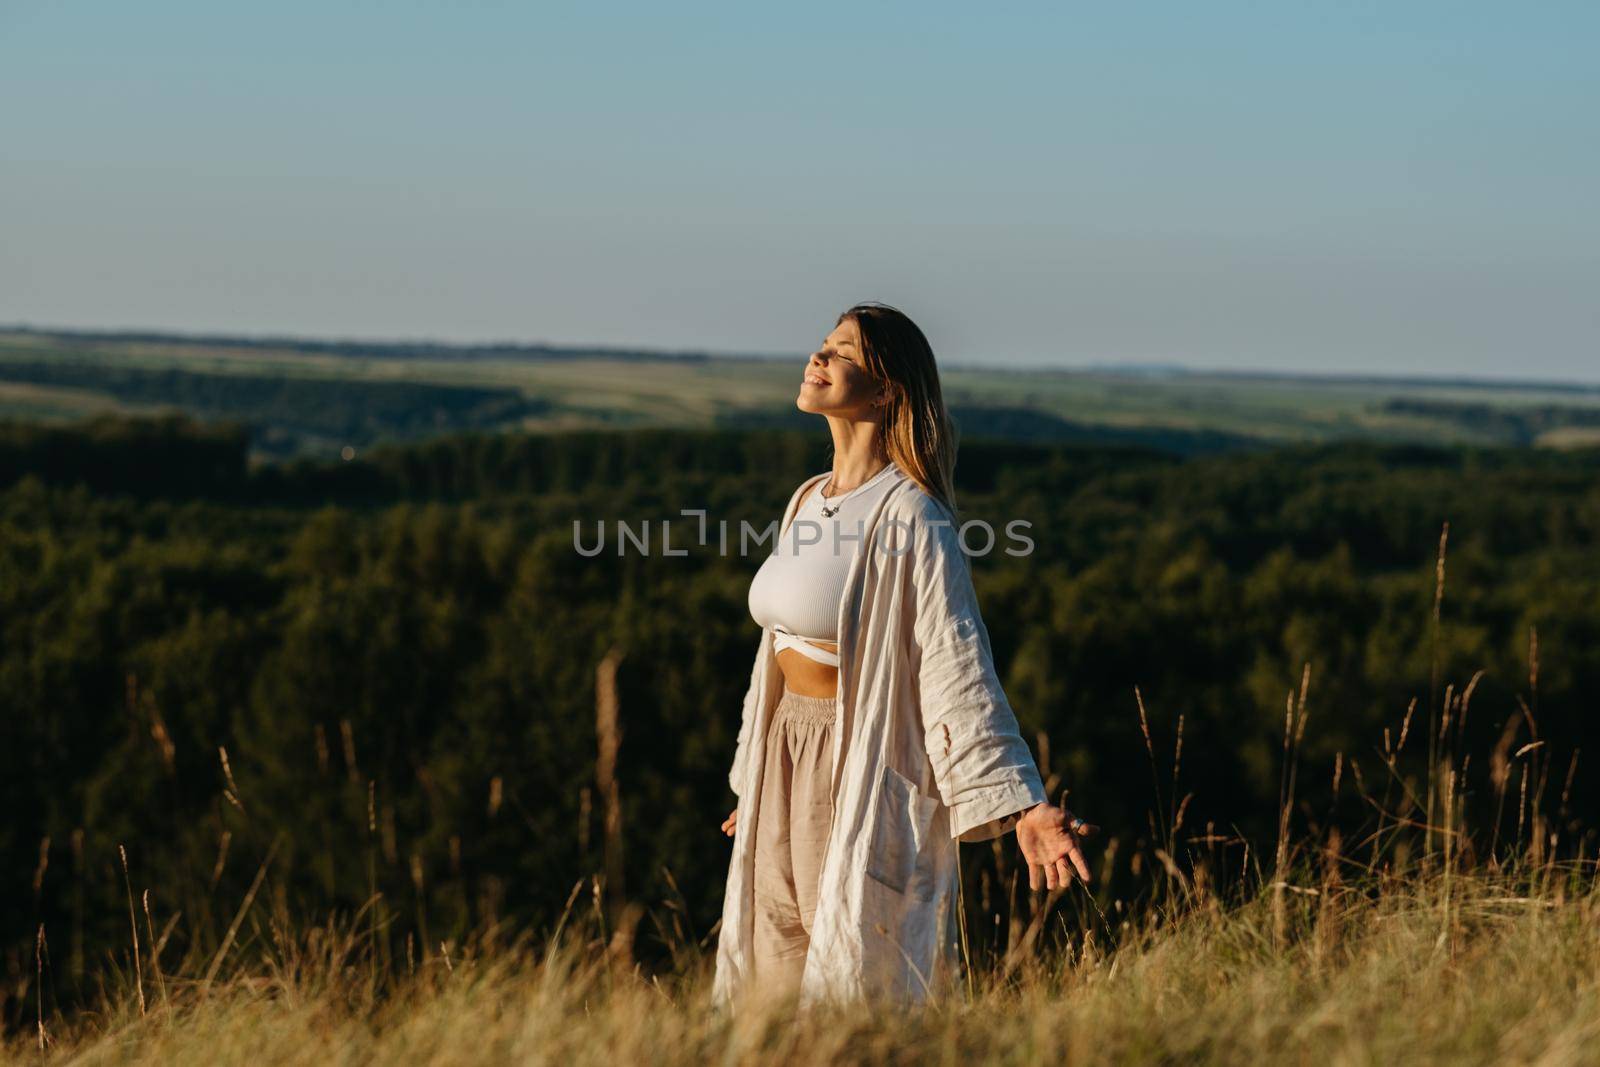 Happy Young Woman Meditating and Catching Sunlight Outdoors at Sunset with Scenic Landscape on Background